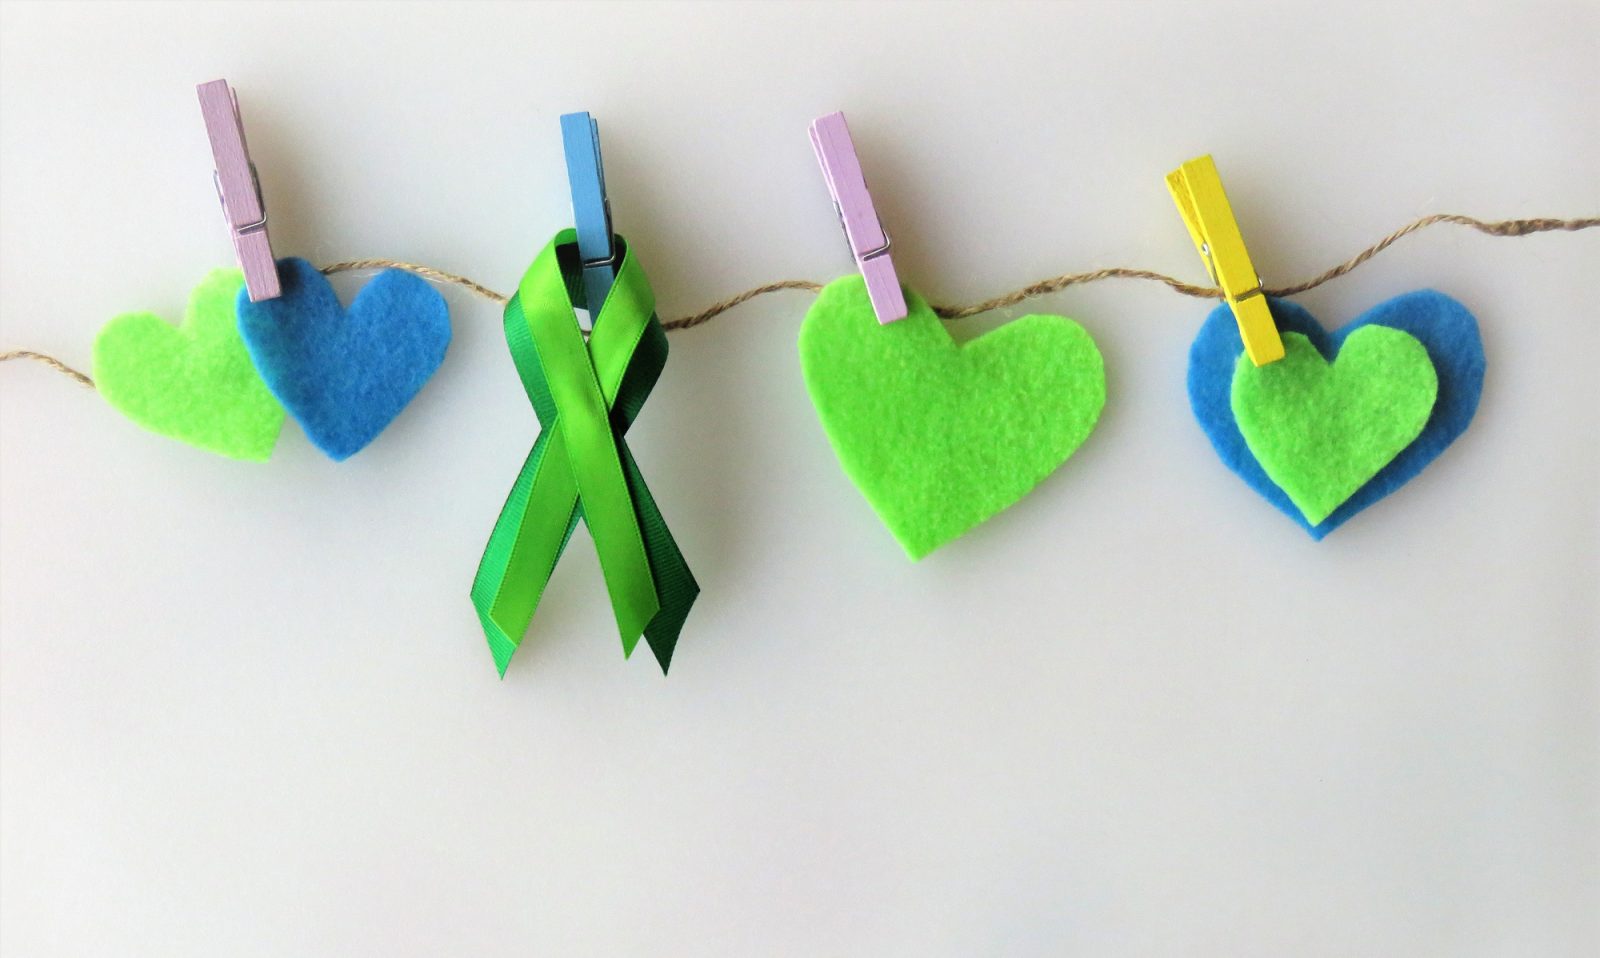 Green and blue felt hearts and green awareness ribbons are attached to a line of twine with colourful clothes pins.